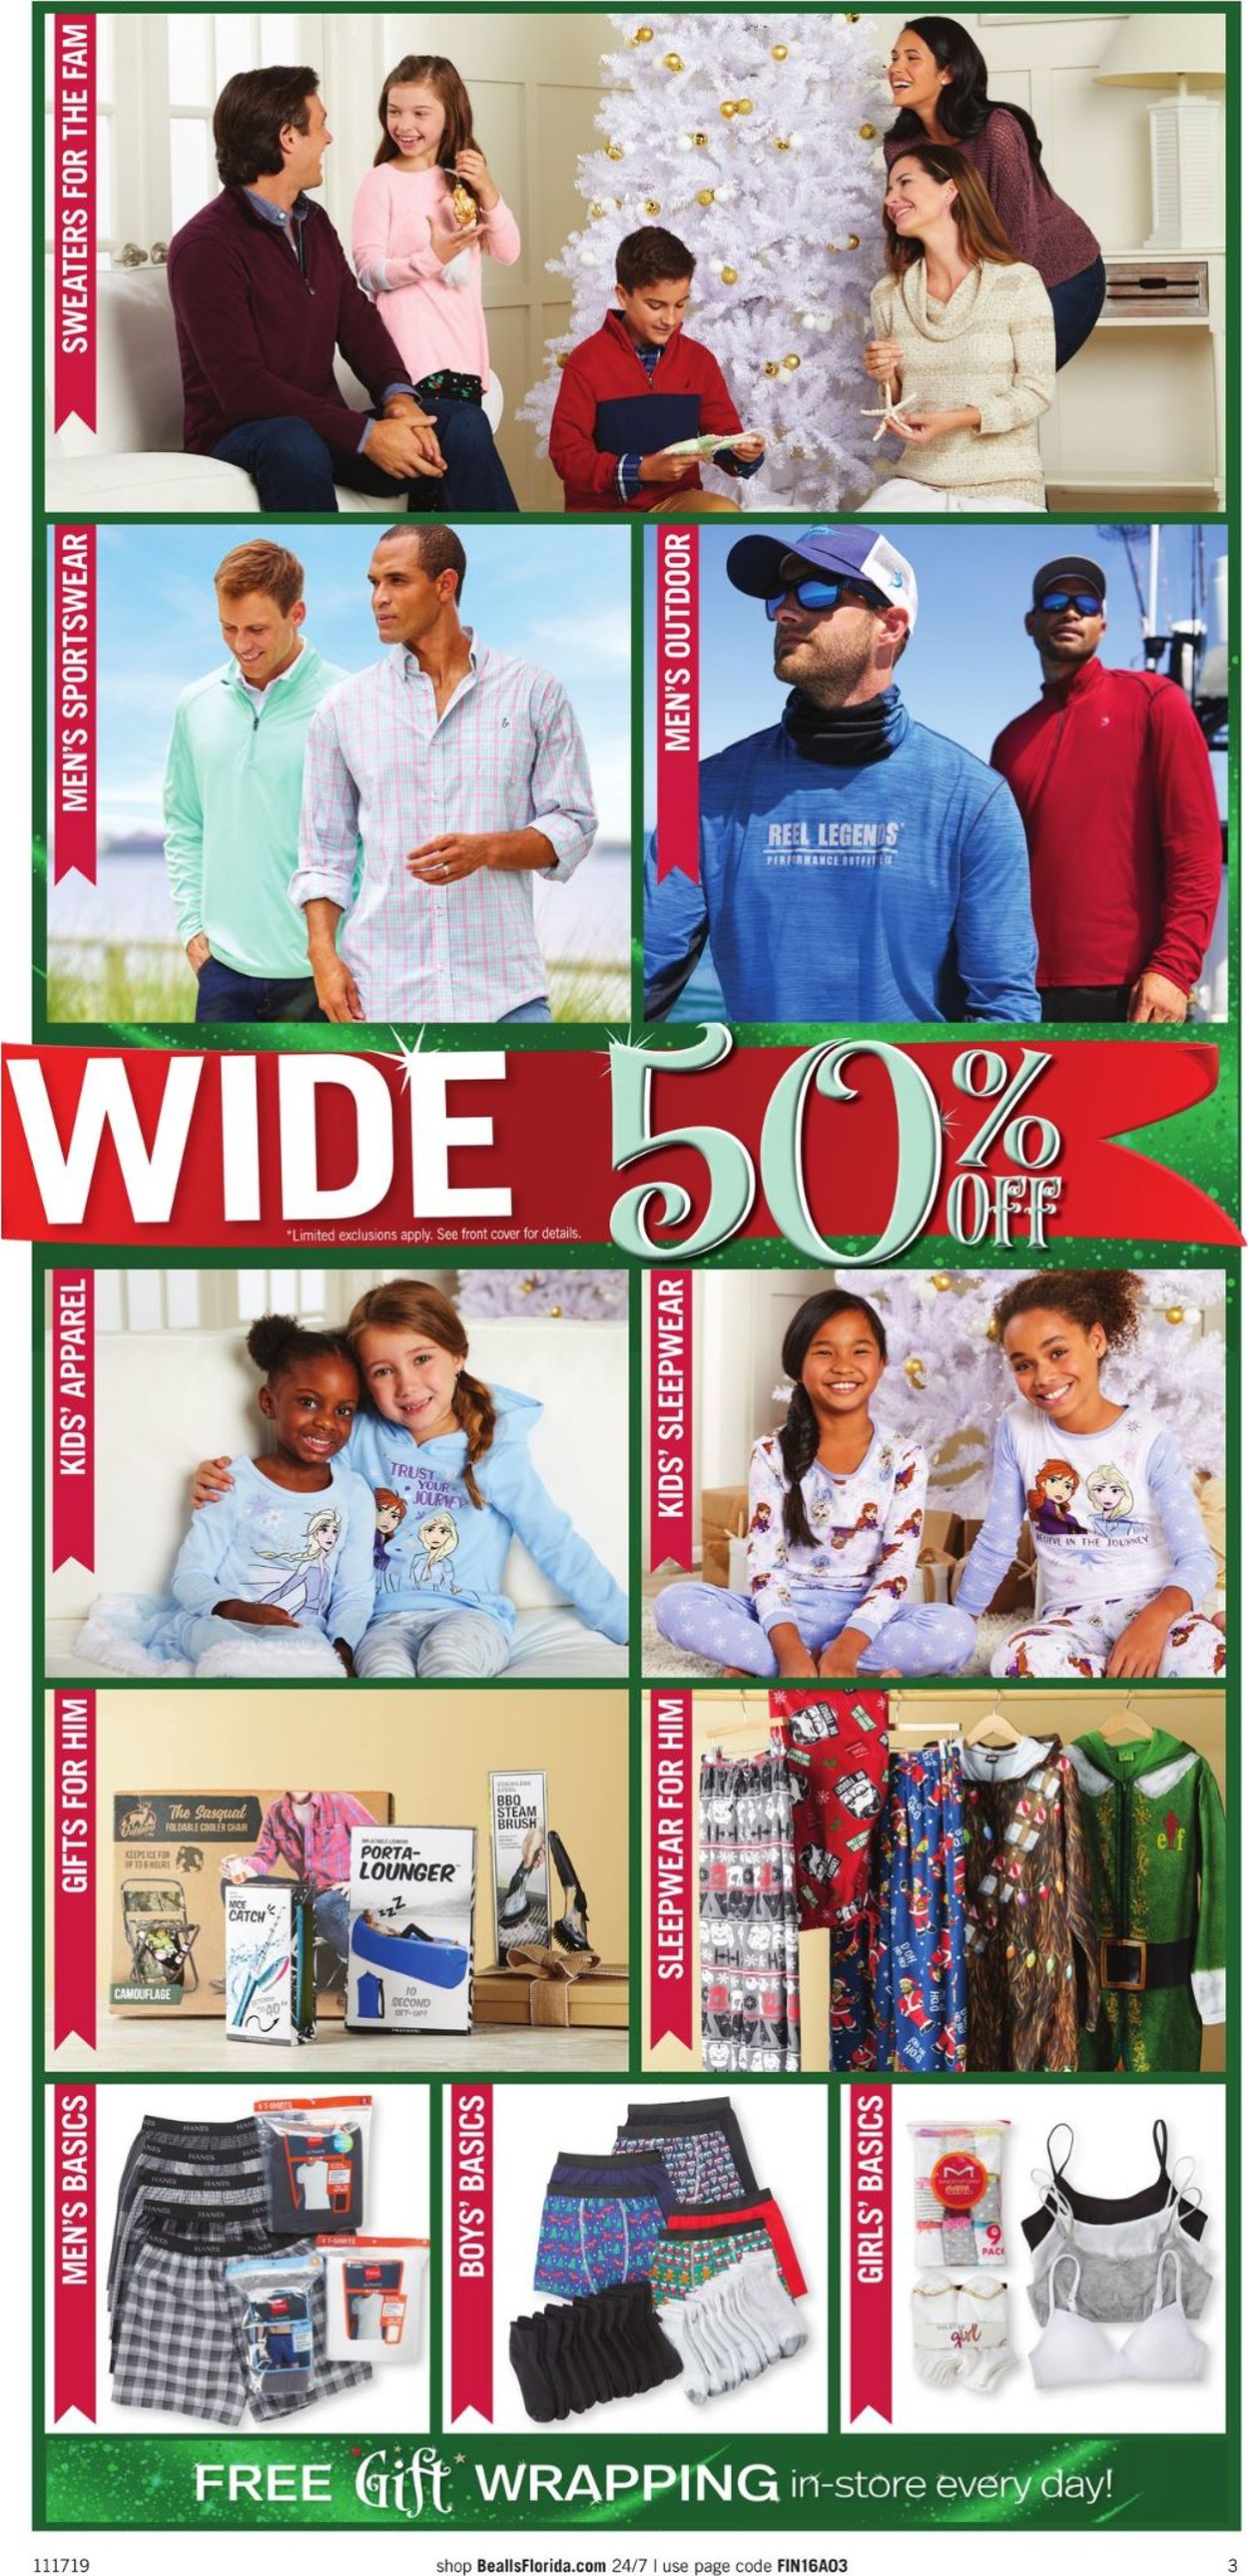 Bealls Florida Ad from 11/17/2019